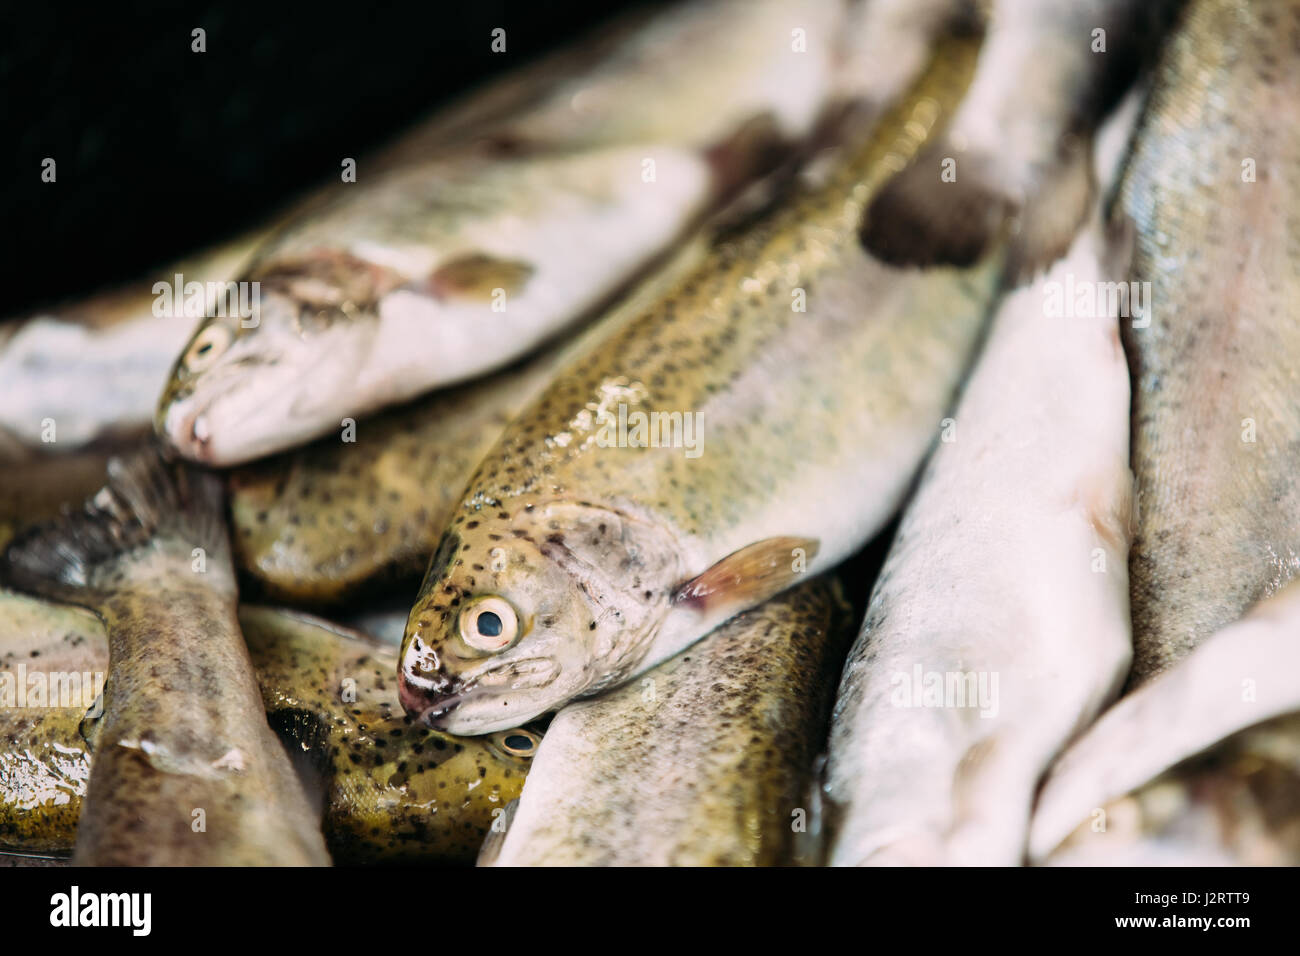 Fresh Black Sea Salmon Fish On Display On Ice On Market Store Shop. Seafood Fish Background. Black Sea Salmon Is A Fairly Small Species Of Salmon. It  Stock Photo